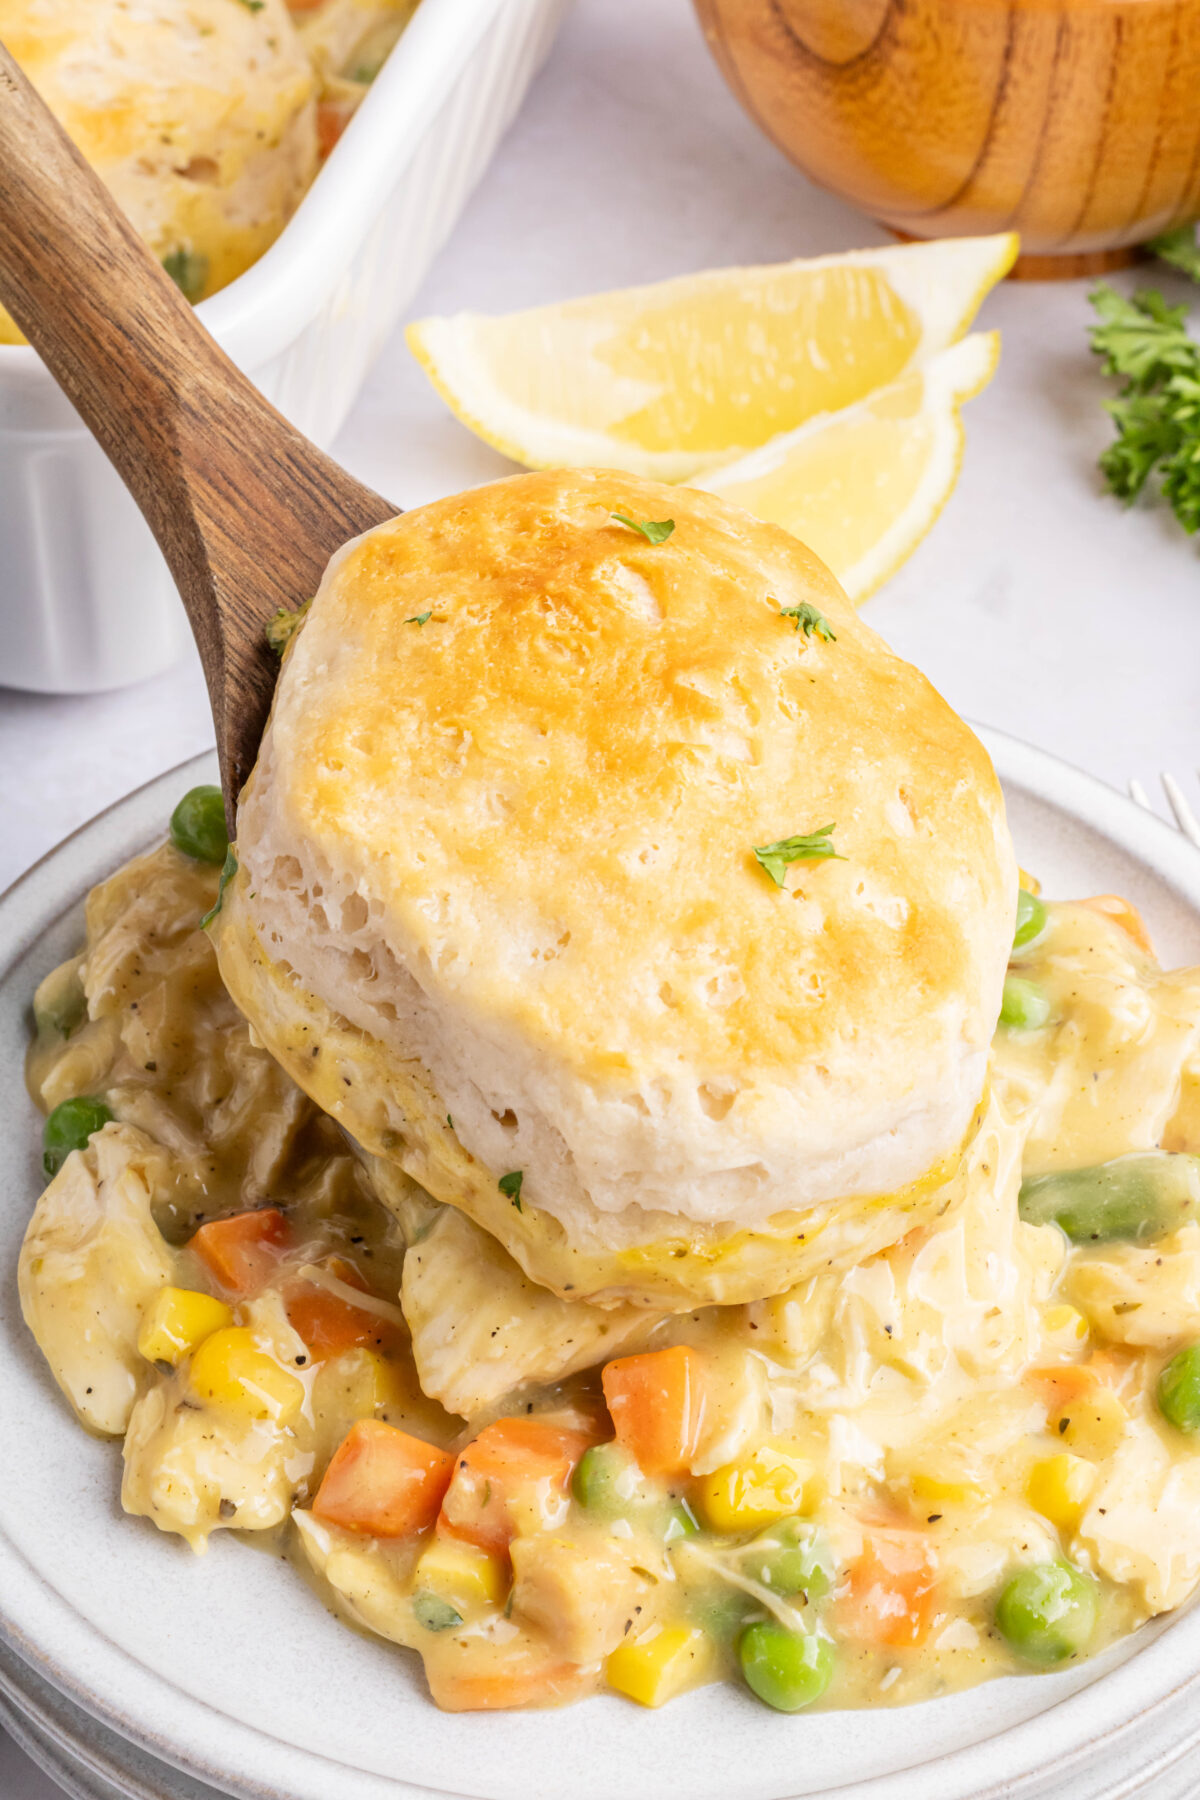 Get your family together for a comforting weeknight meal with this easy chicken pot pie casserole recipe. It's an effortless hearty meal!